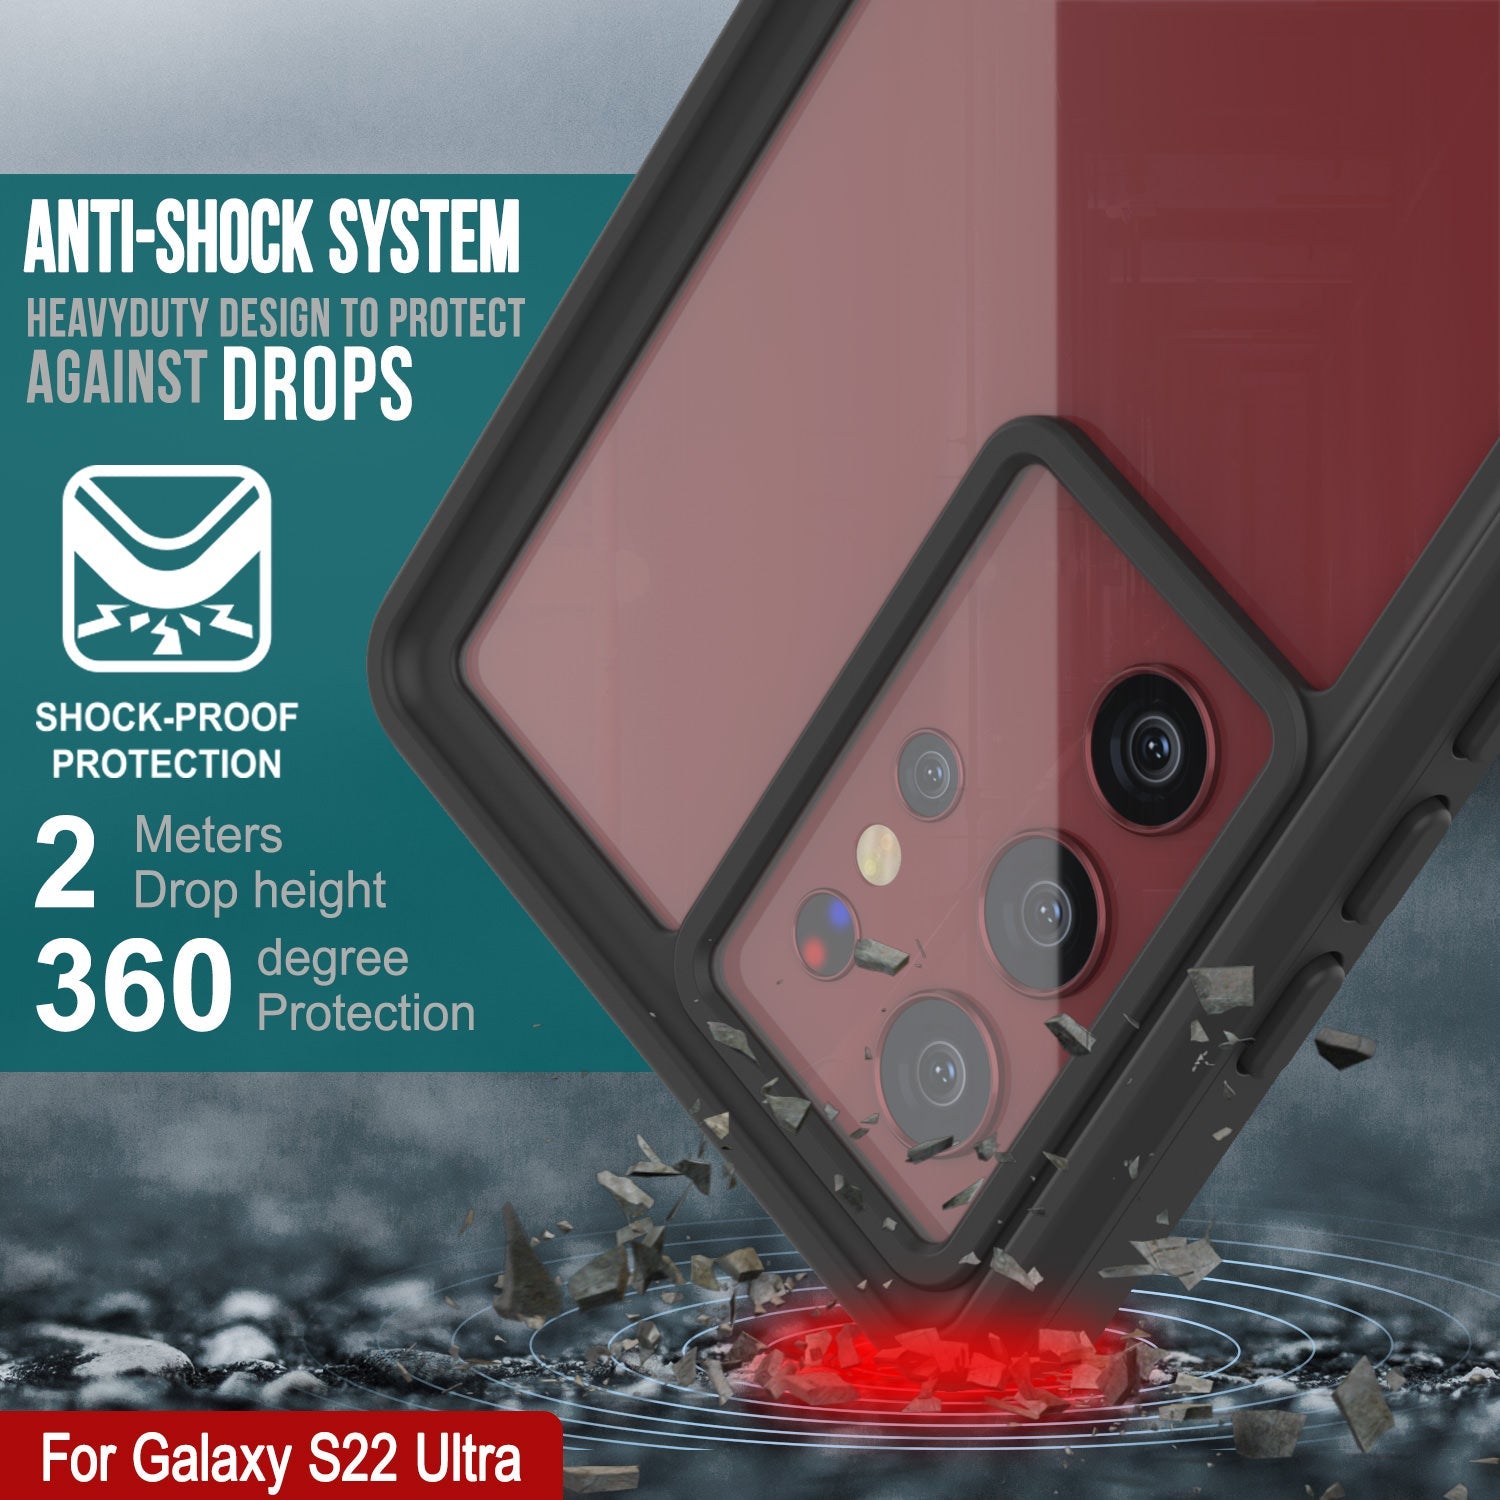 Galaxy S22 Ultra Water/ Shock/ Snowproof [Extreme Series] Slim Screen Protector Case [Red]